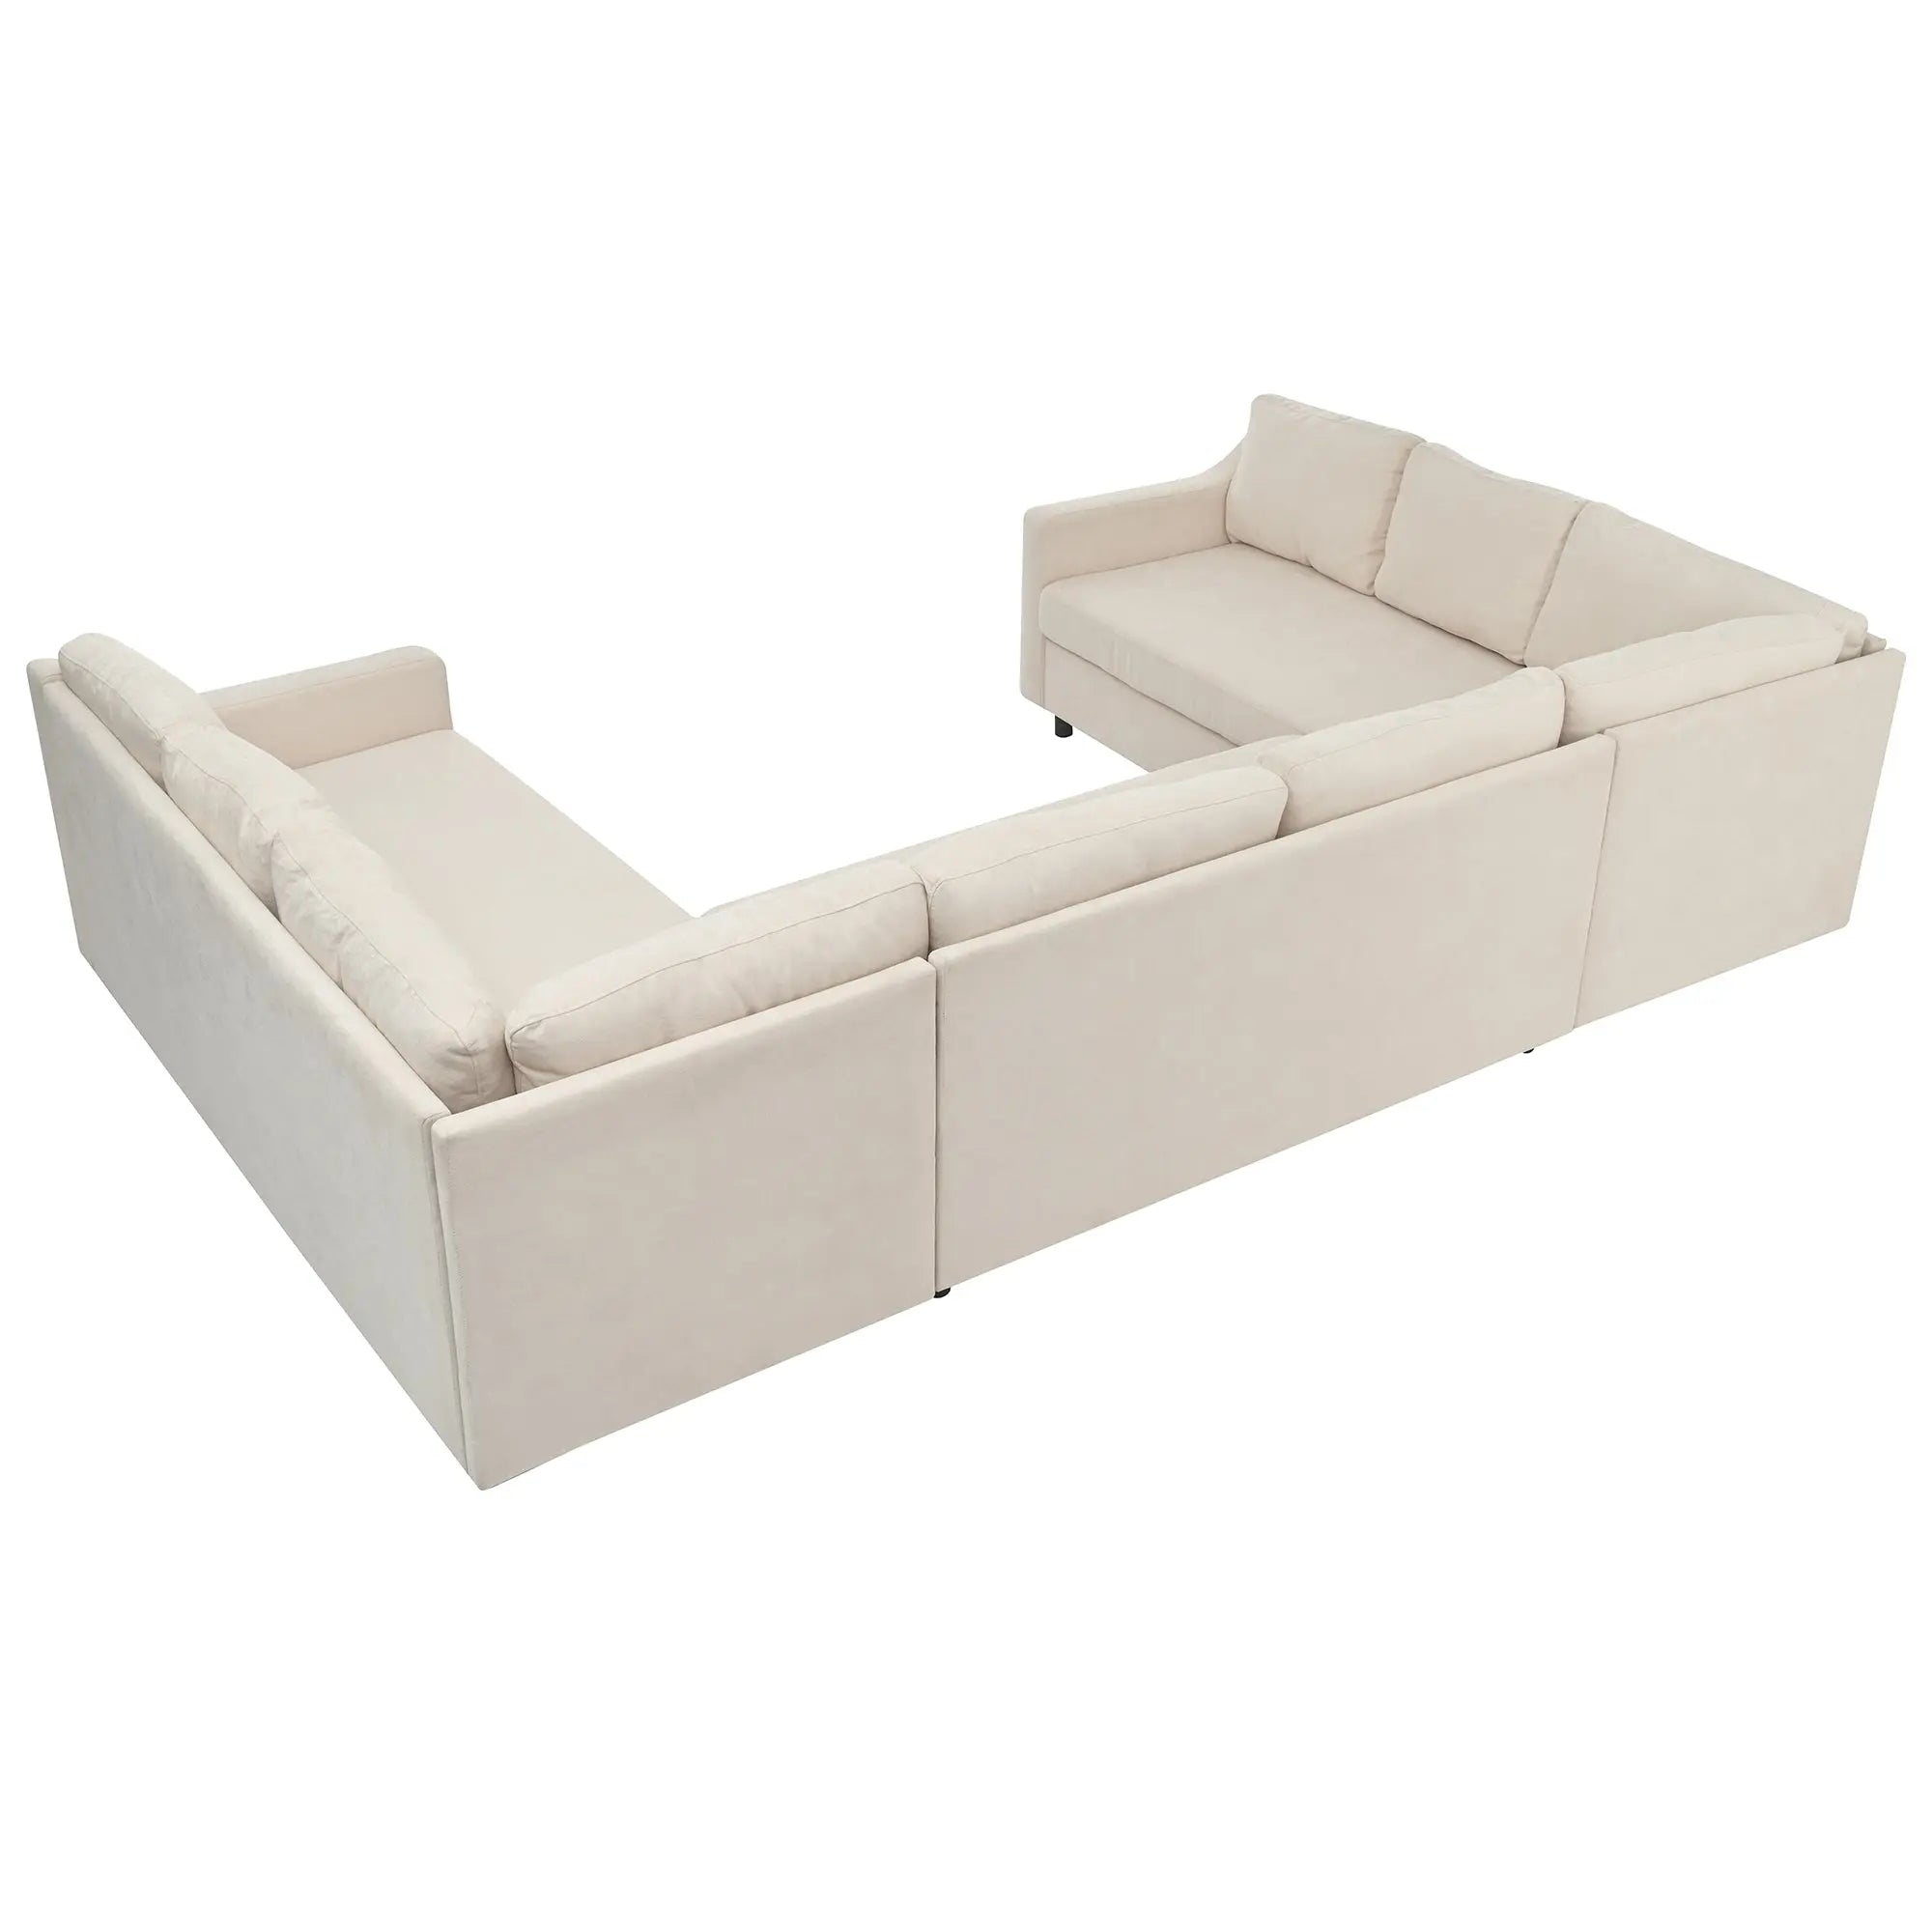 Bellemave 117" 3 Pieces Upholstered U-Shaped Large Sectional Sofa with Thick Seat and Back cushions Bellemave